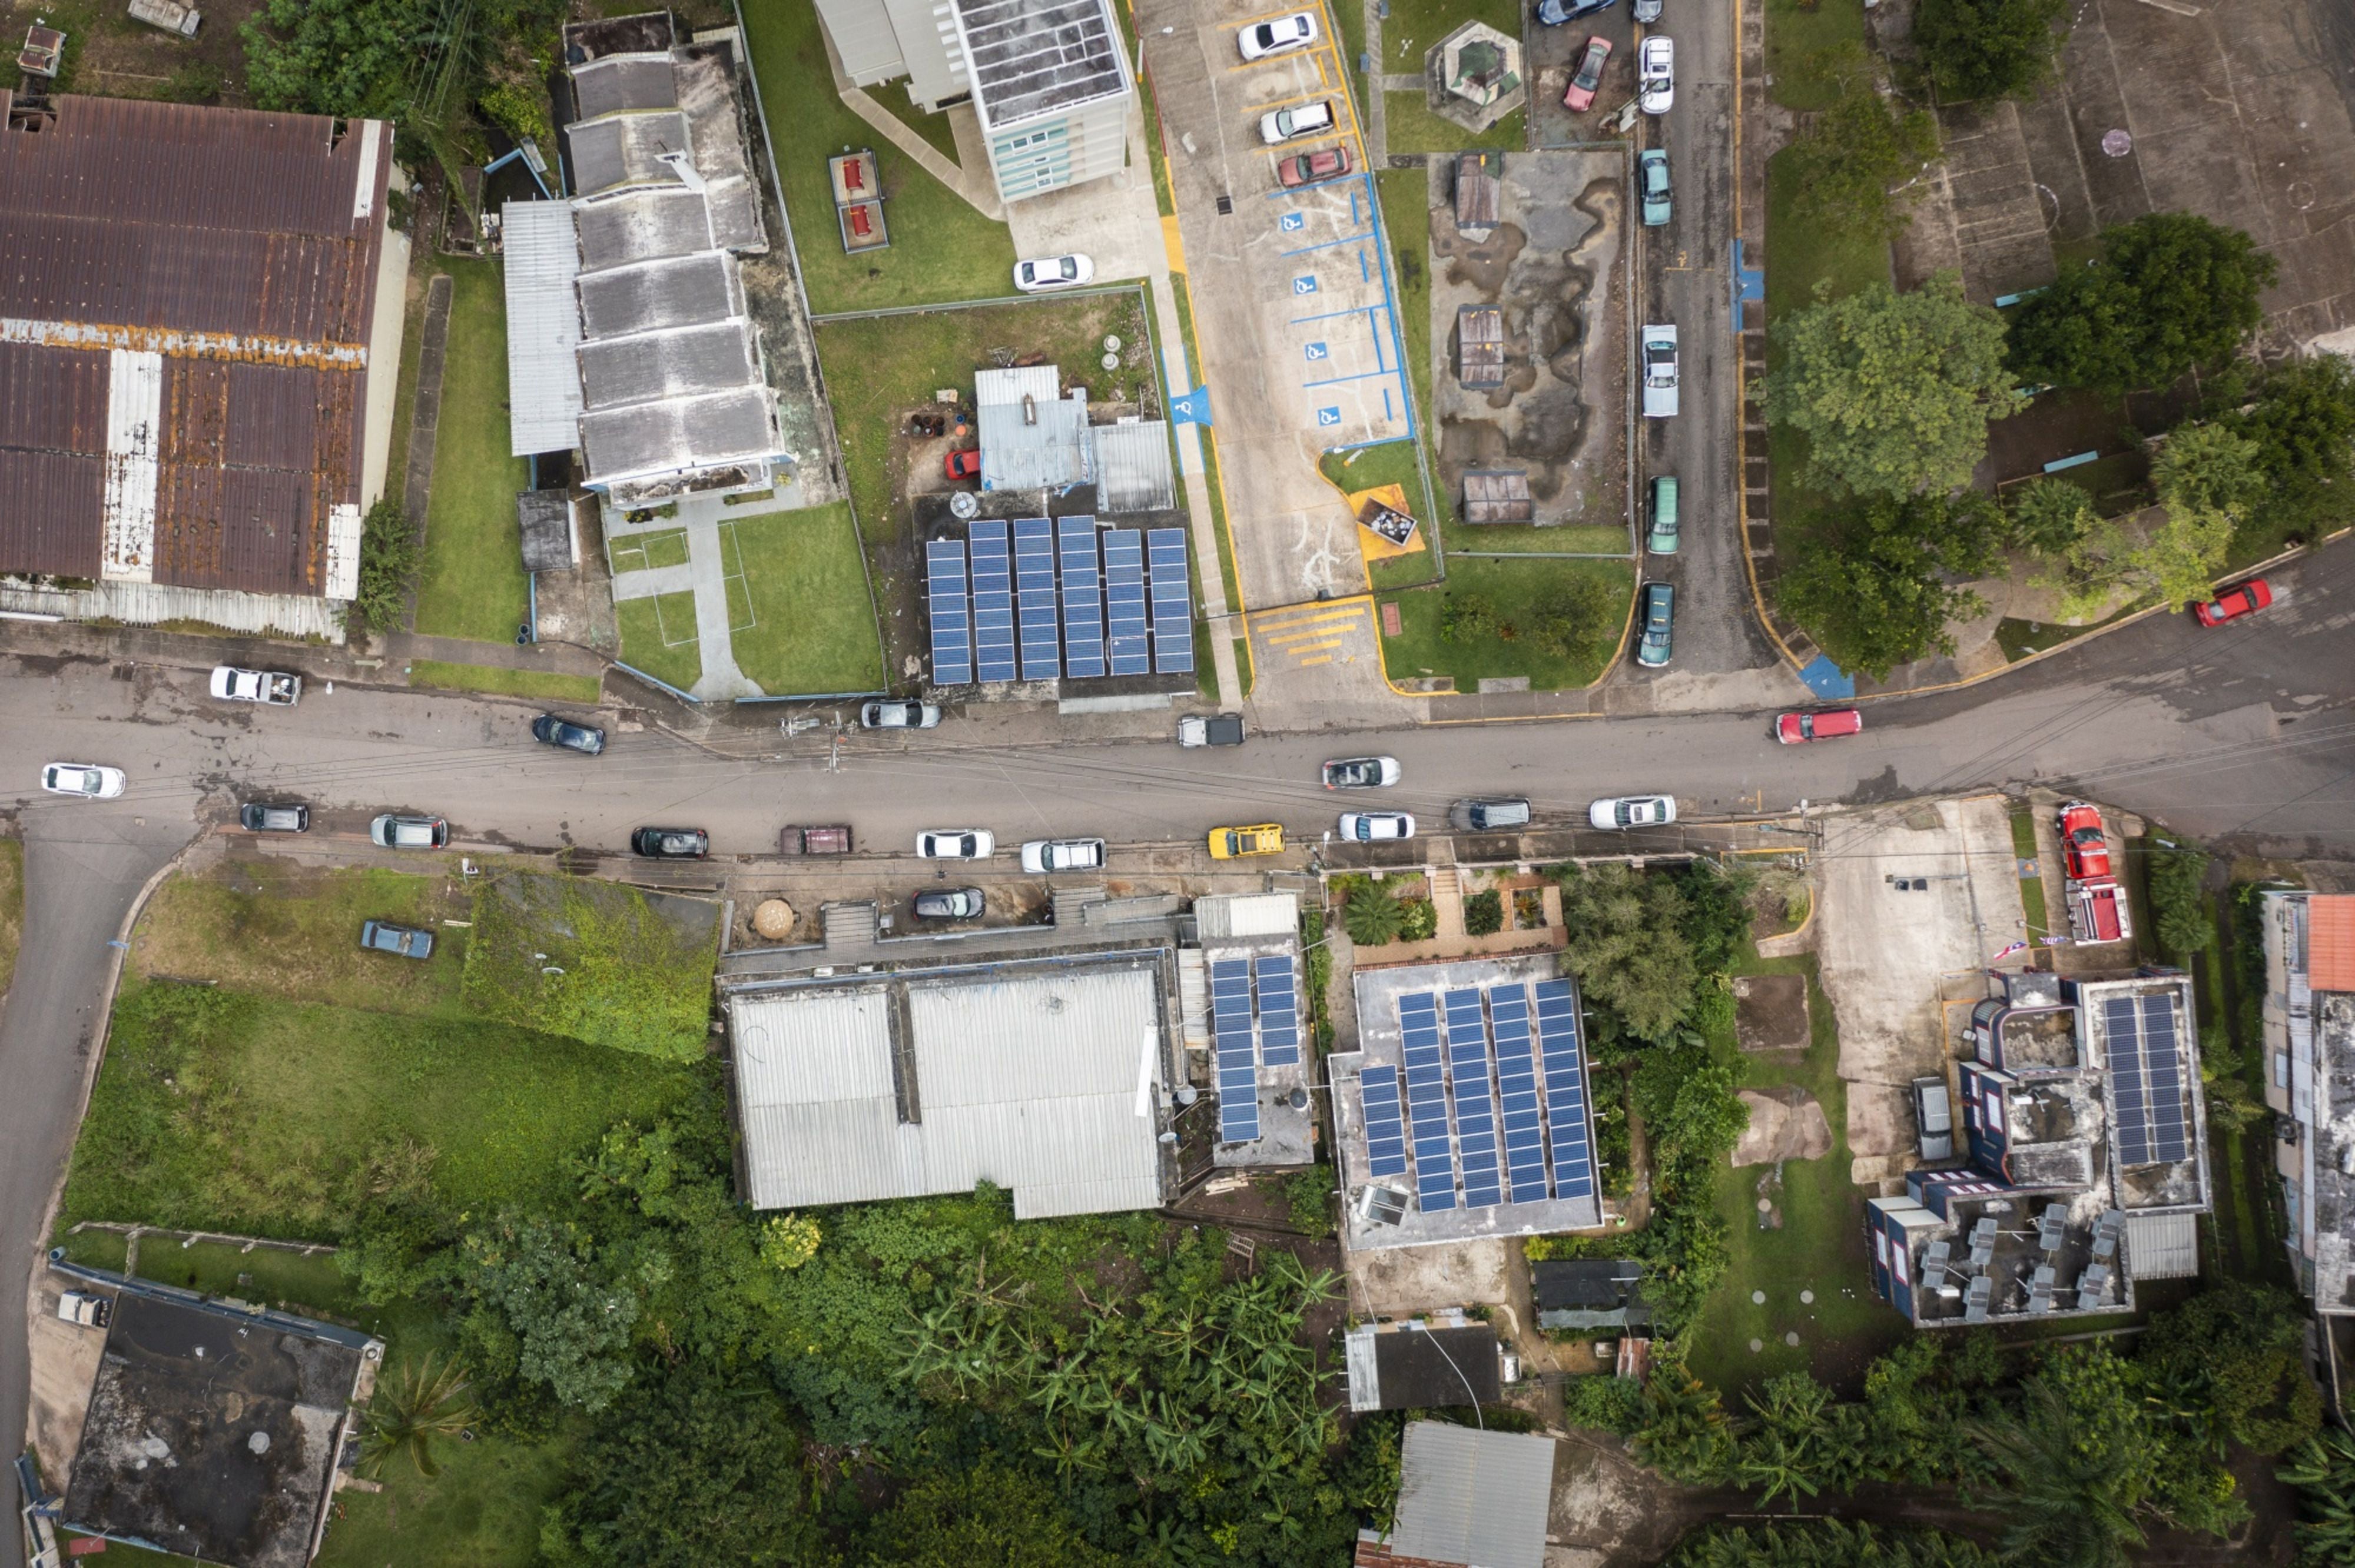 Aerial view of the microgrid in Castañer